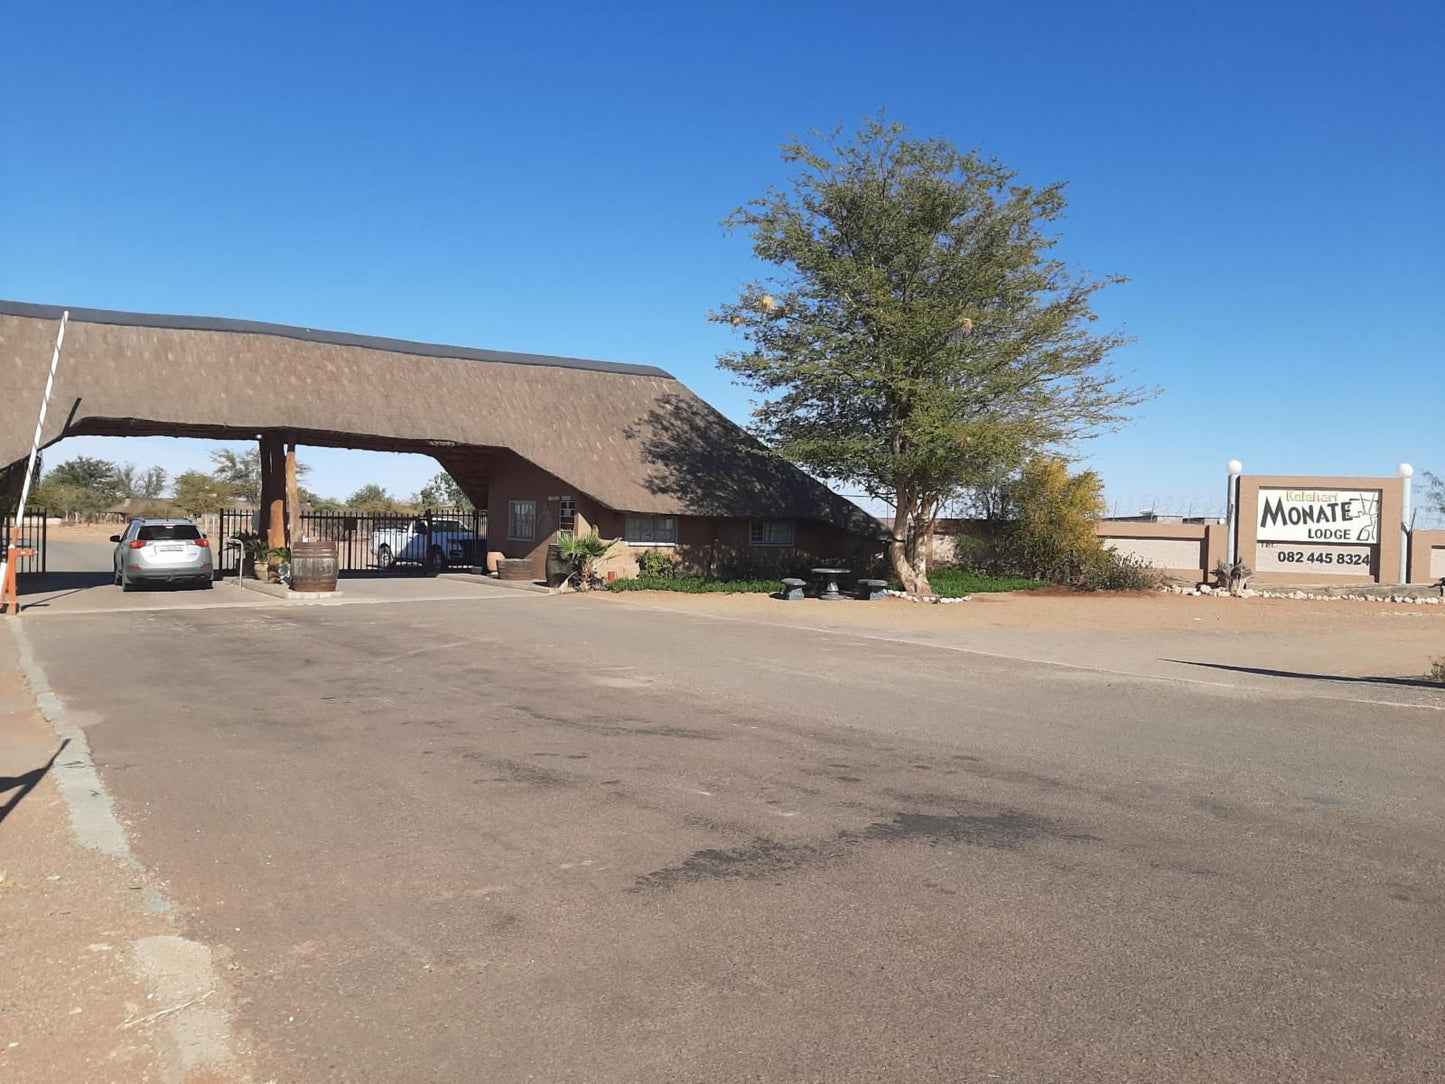 Kalahari Monate Lodge And Camping Upington Northern Cape South Africa Complementary Colors